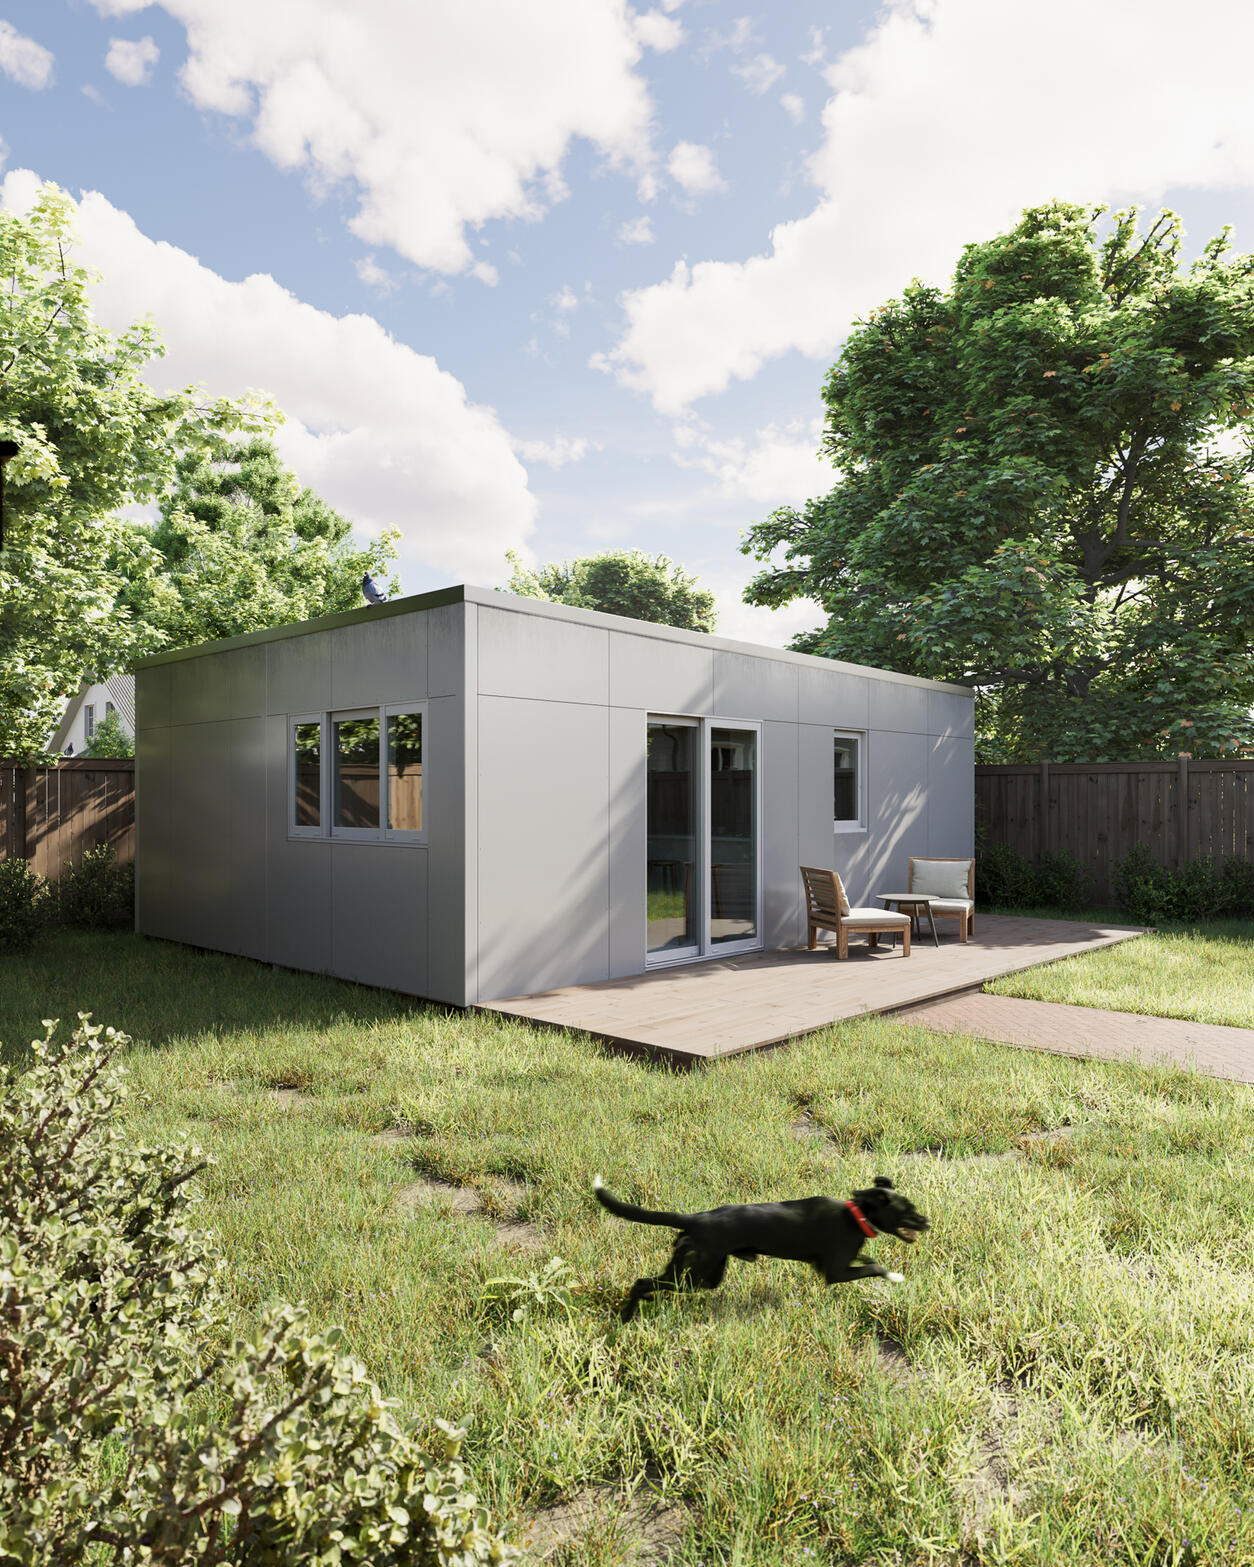 Manufactured Home for a Florida-Based Startup